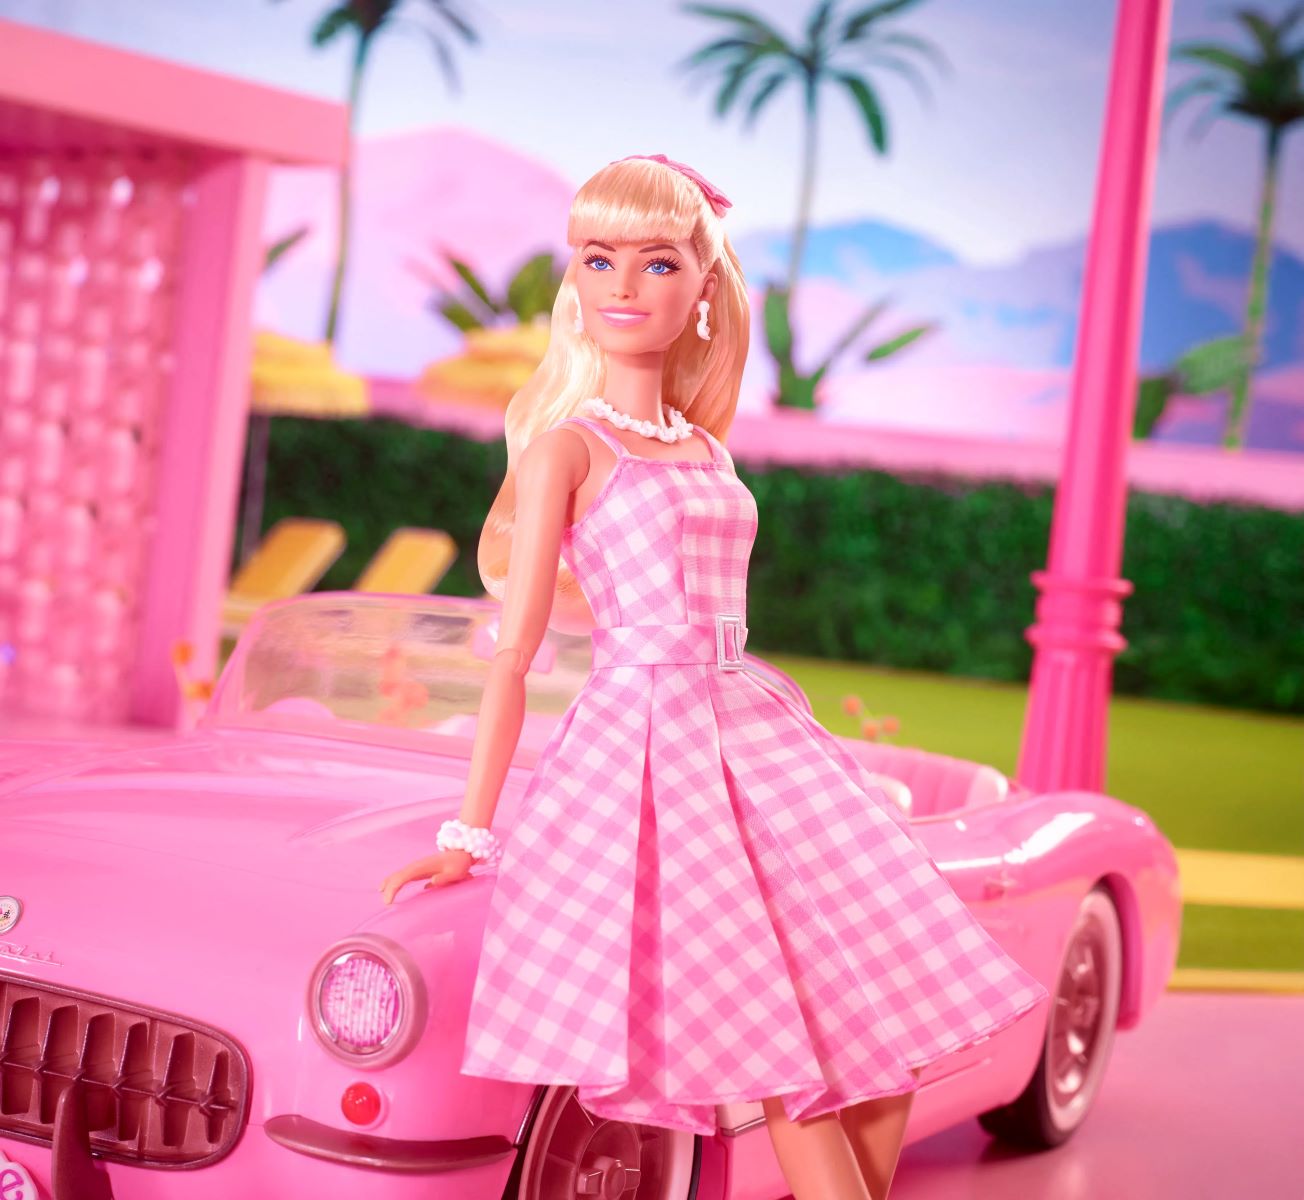 New Trend: Adults Find Emotional Support In Barbie Dolls